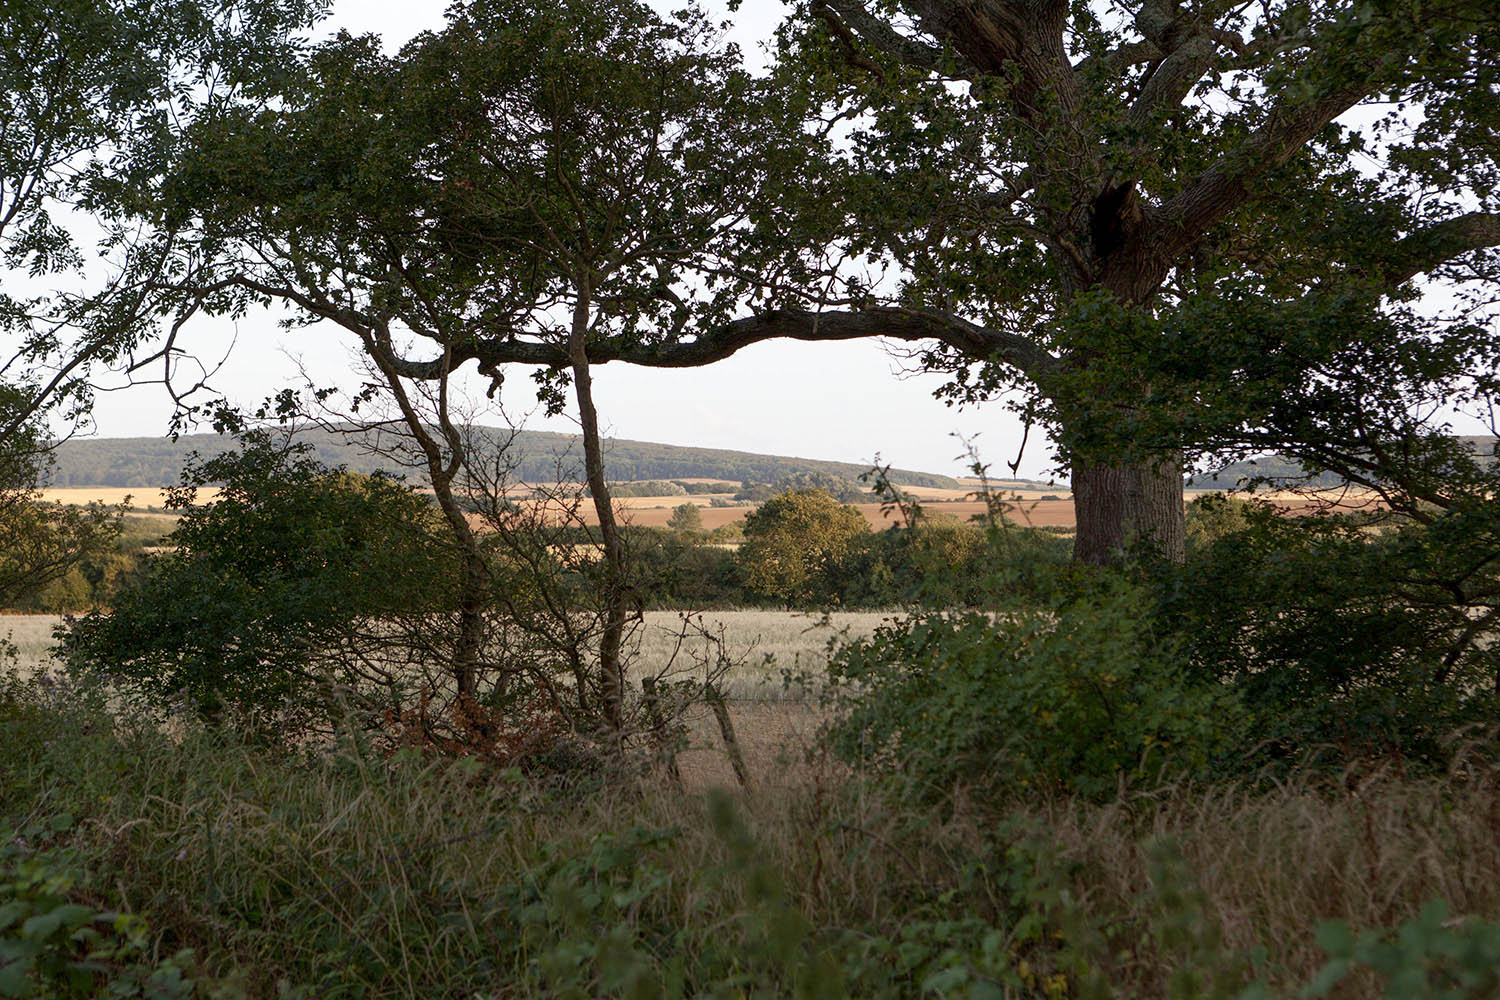 Camp Wight has amazing views of the rolling isle of wight countryside